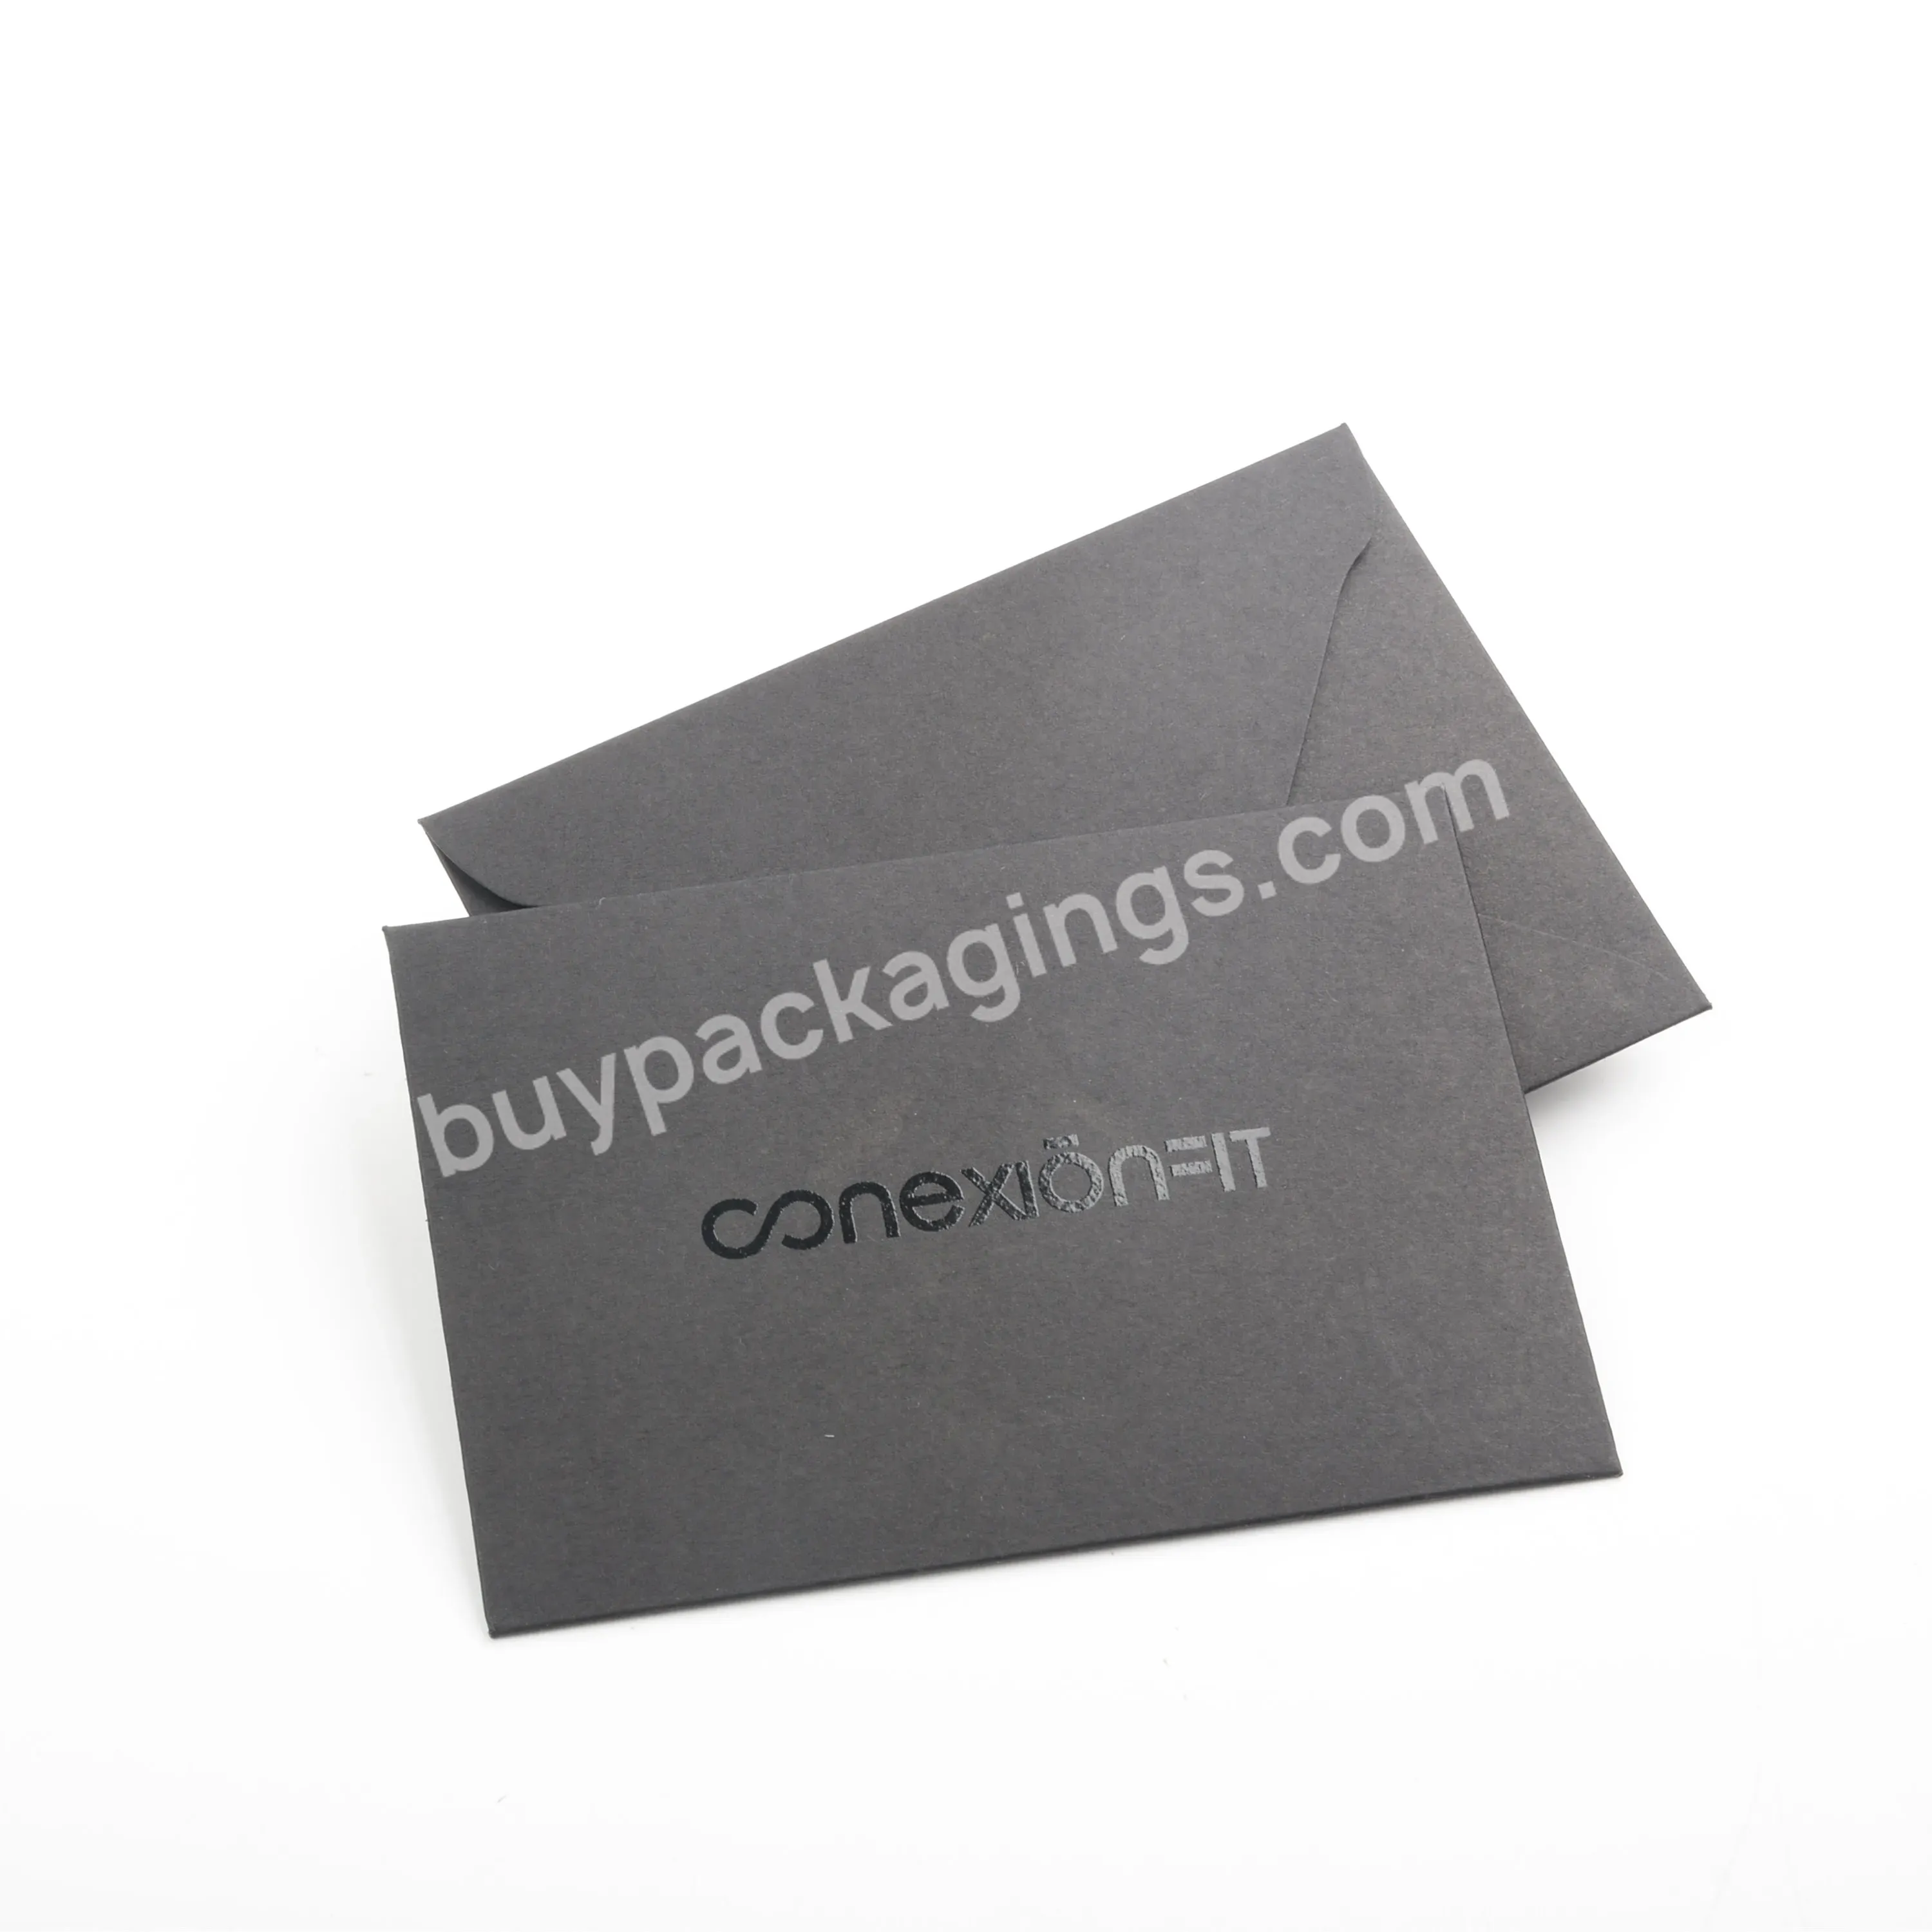 Custom Envelopes And Cards Of Any Size Printed In Black With High Quality - Buy Custom Envelopes,Black Packing Envelopes,Black Envelope.